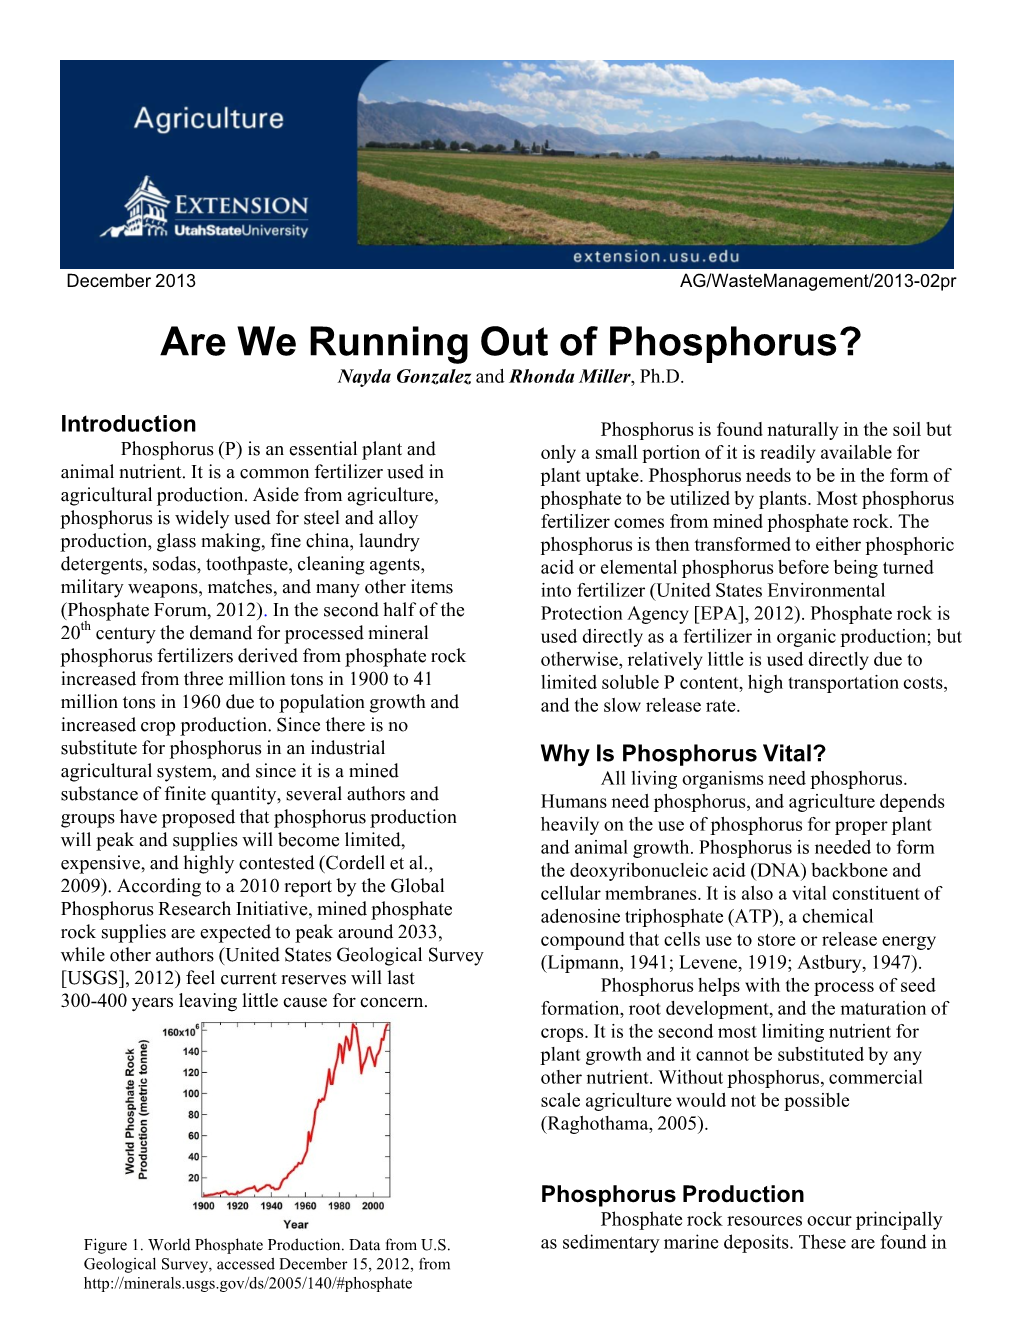 Are We Running out of Phosphorus? Nayda Gonzalez and Rhonda Miller, Ph.D